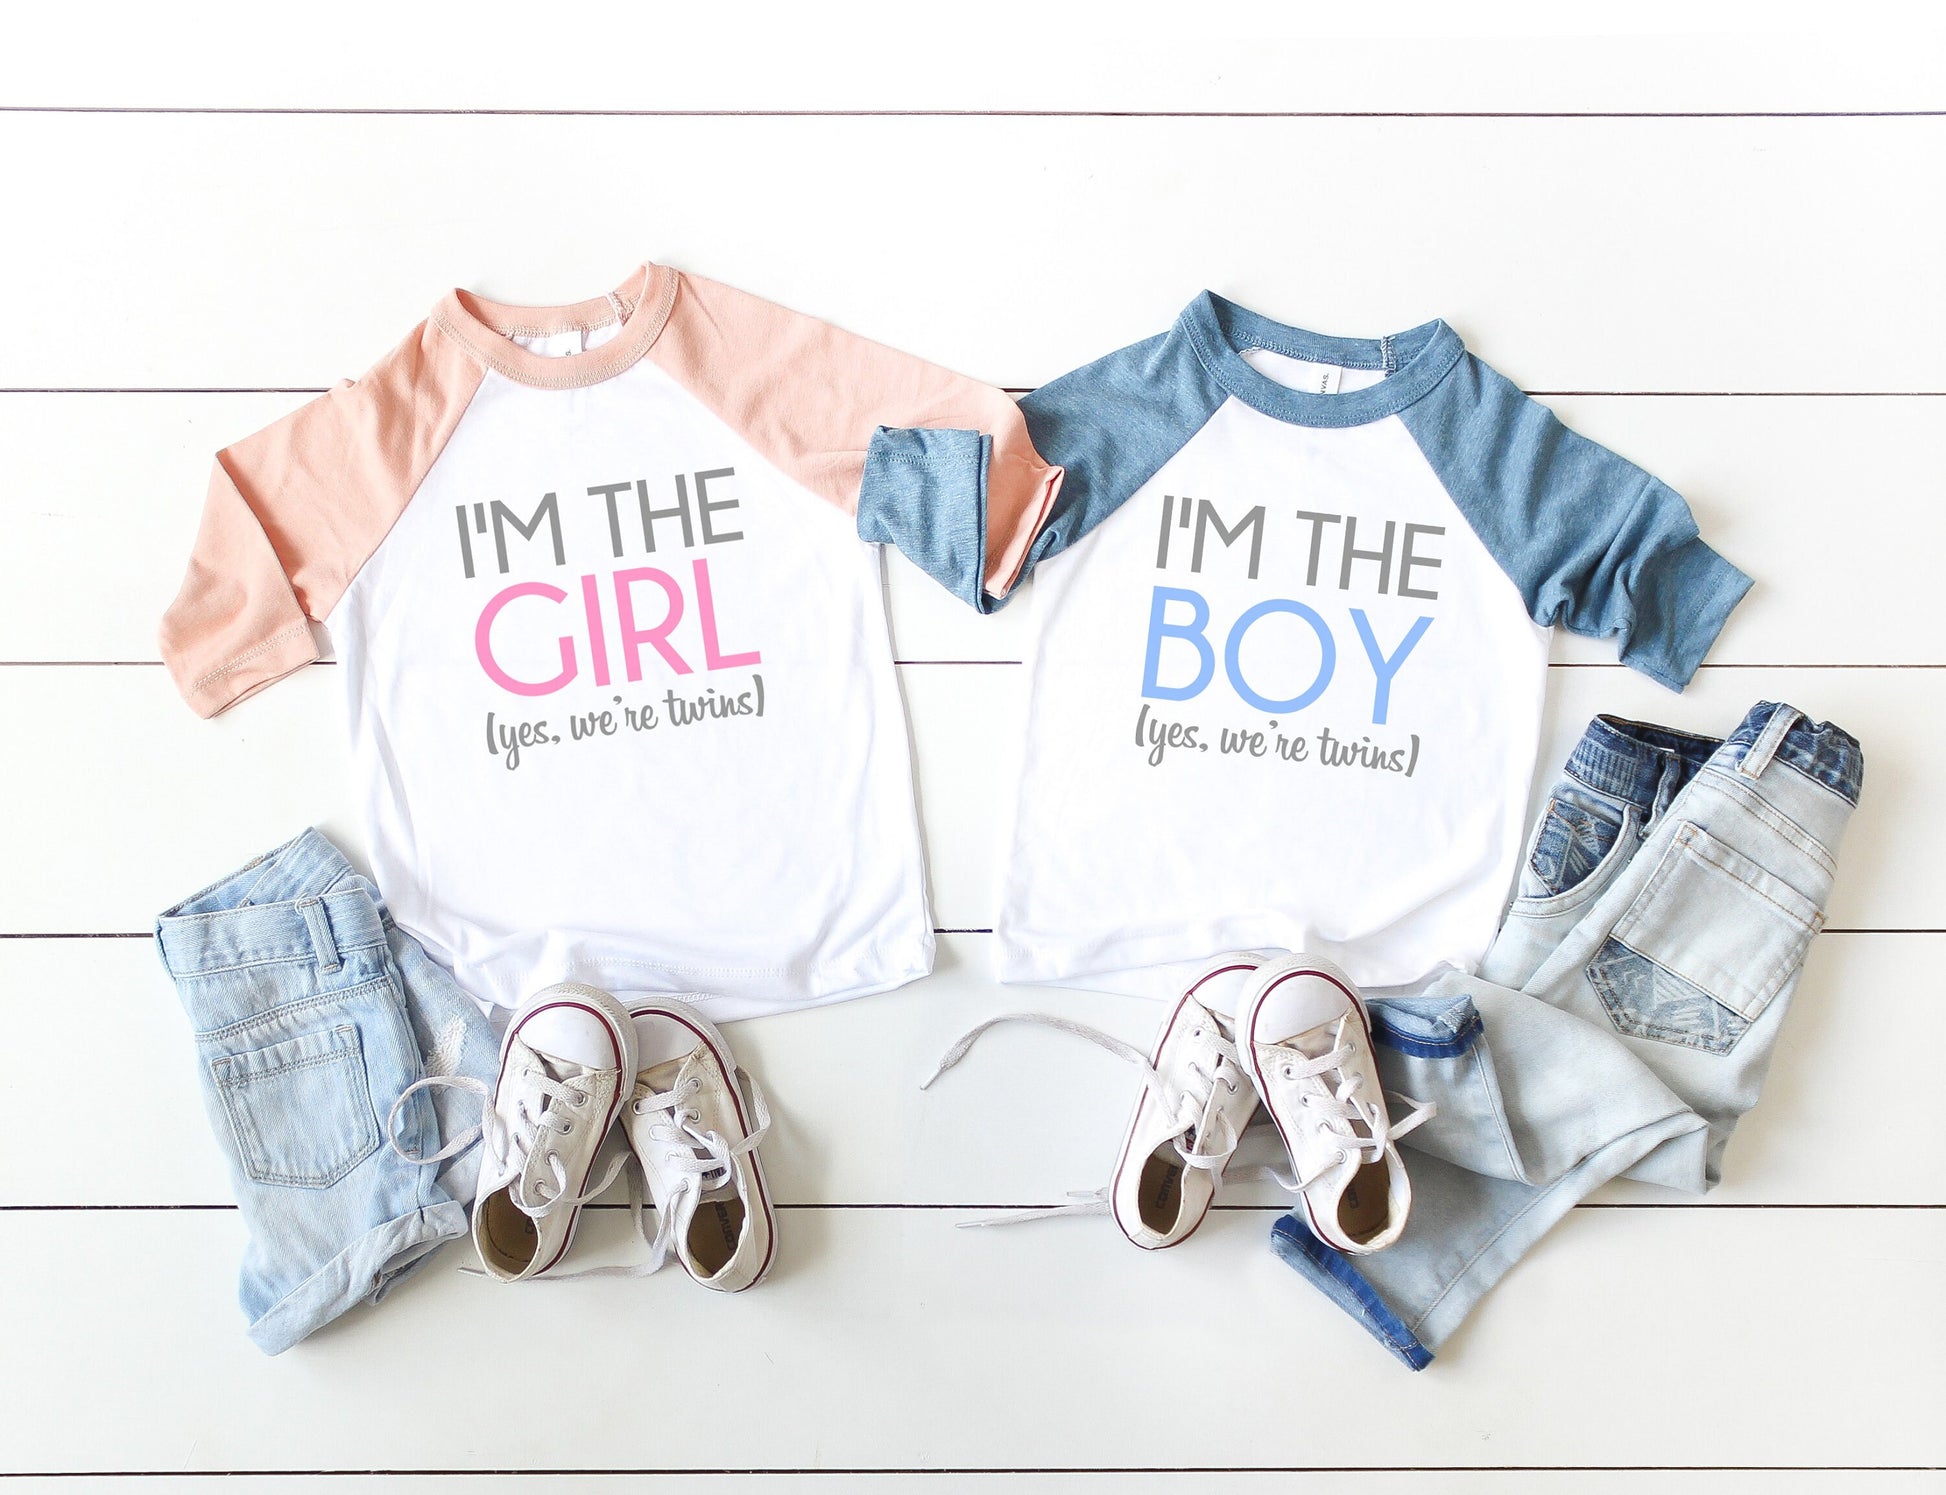 Boy Girl Twins Toddler or Kids Bella + Canvas Raglan Tee - shirts for twins - fraternal twins - gift for boy girl twins - twin toddlers